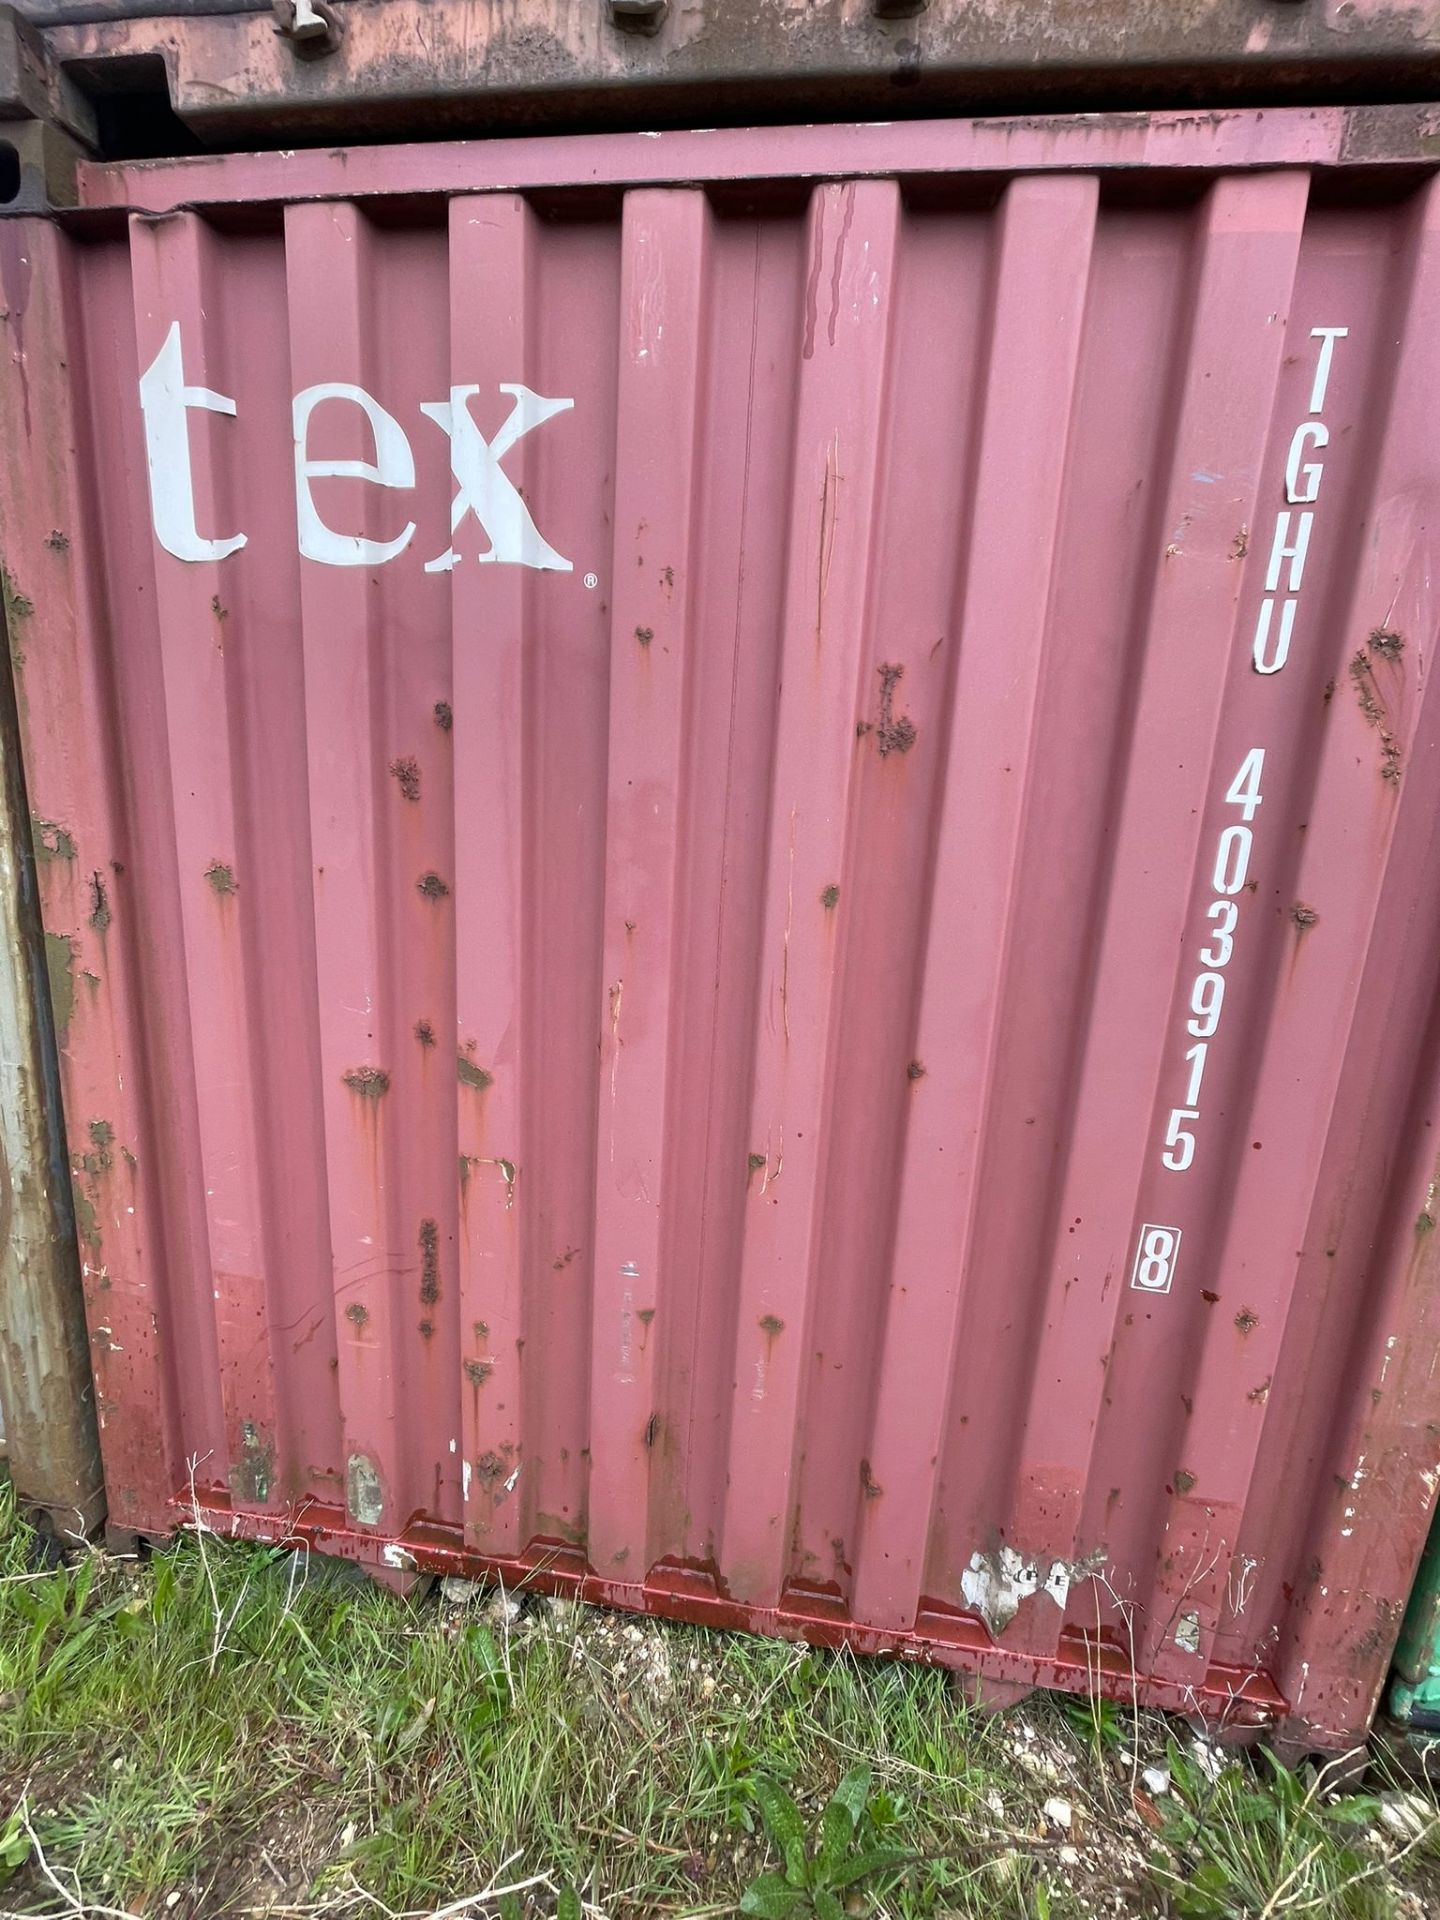 Shipping Container - ref TGHU4039158 - NO RESERVE (40’ GP - Standard) - Image 4 of 4